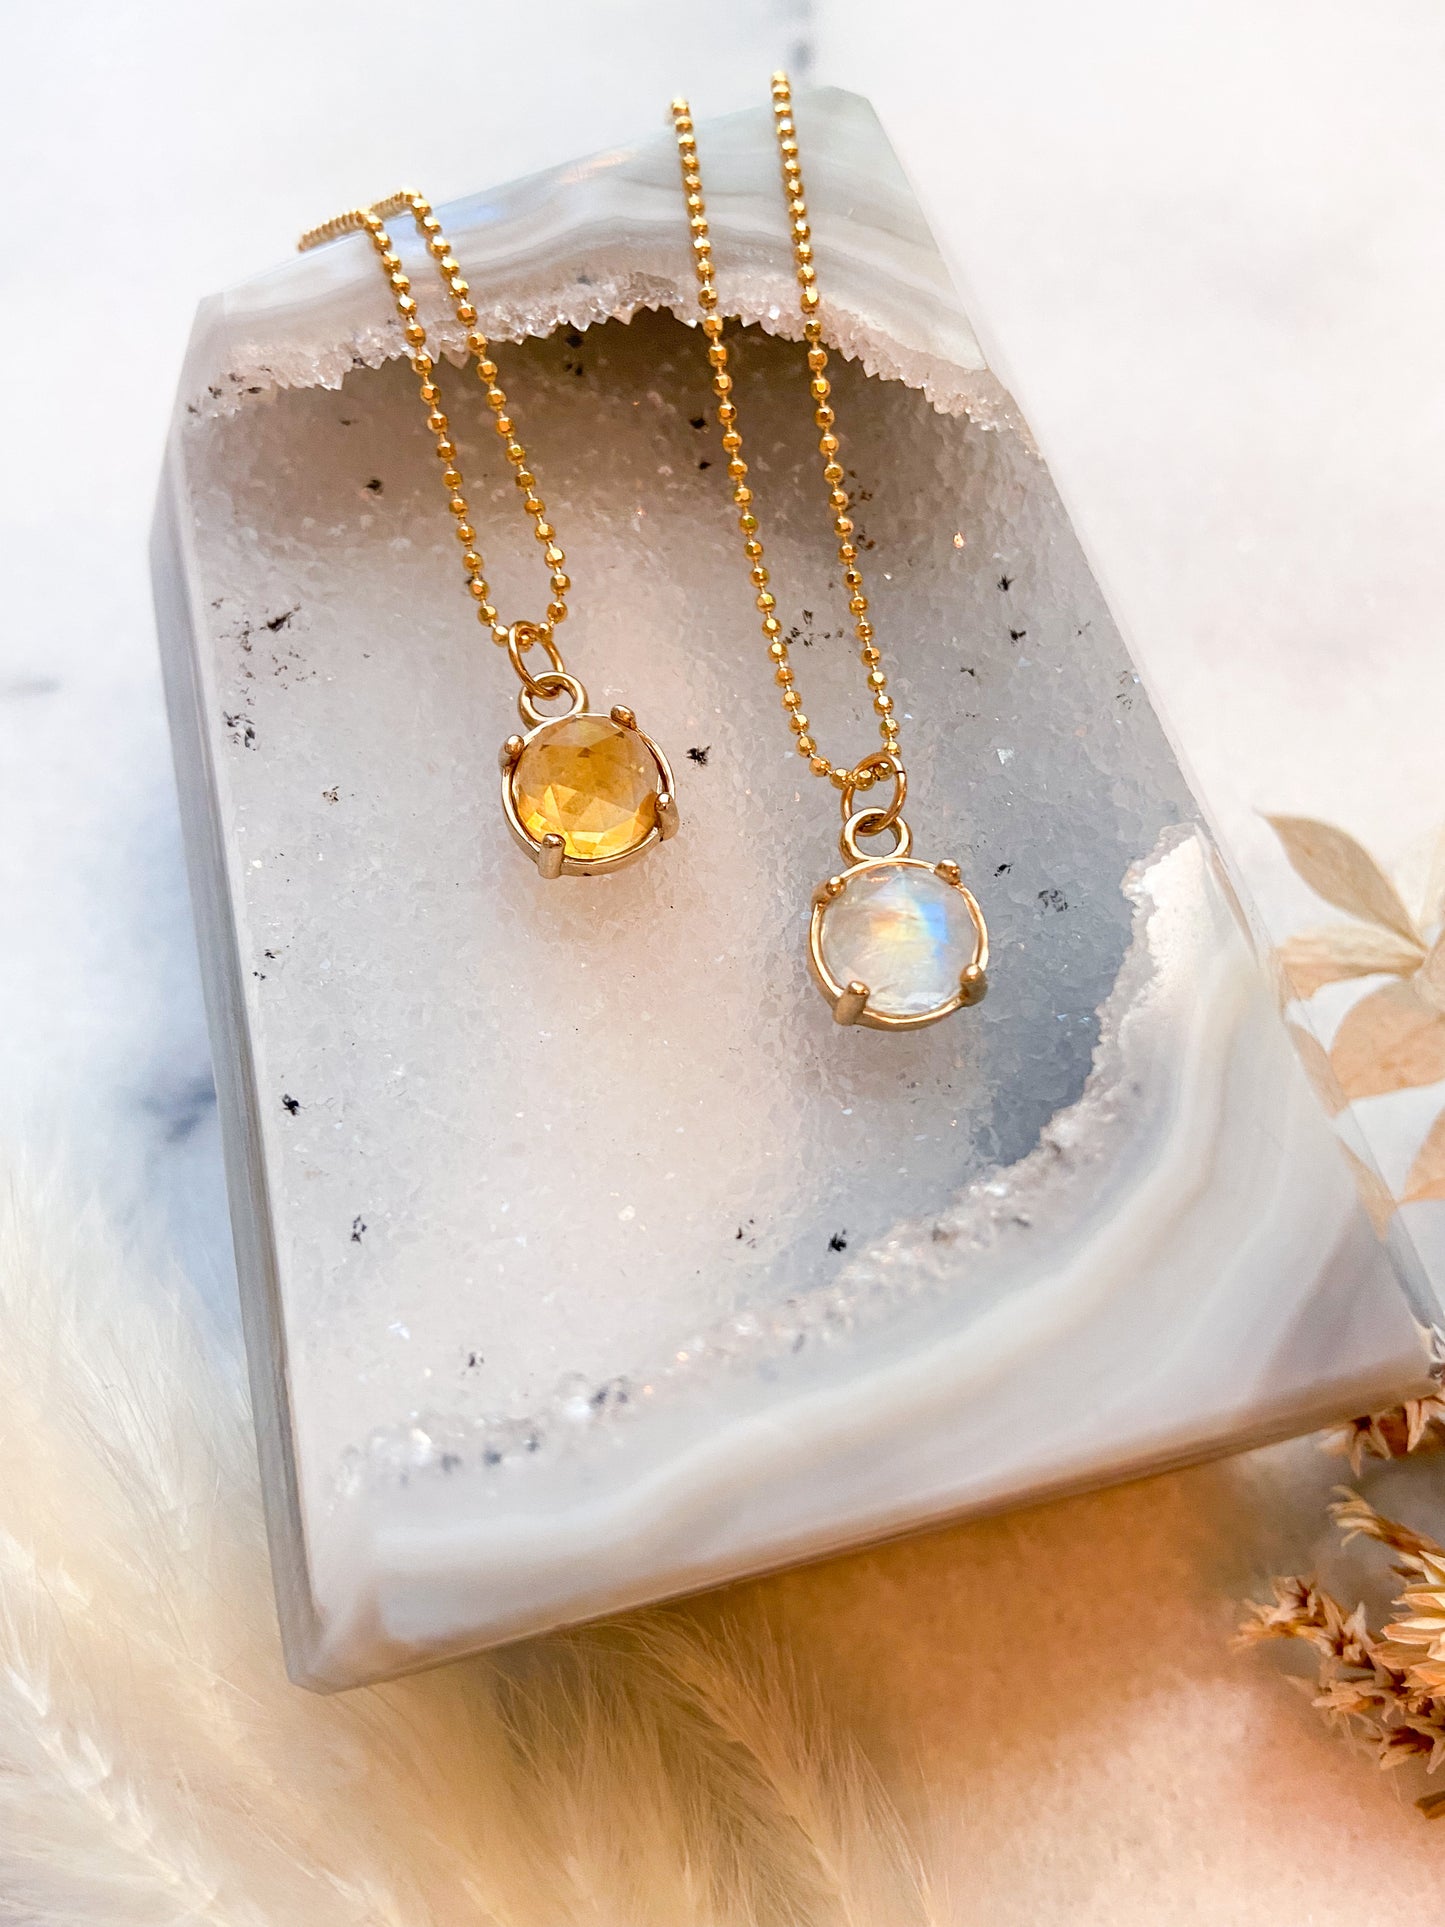 Soleil Necklace with Citrine